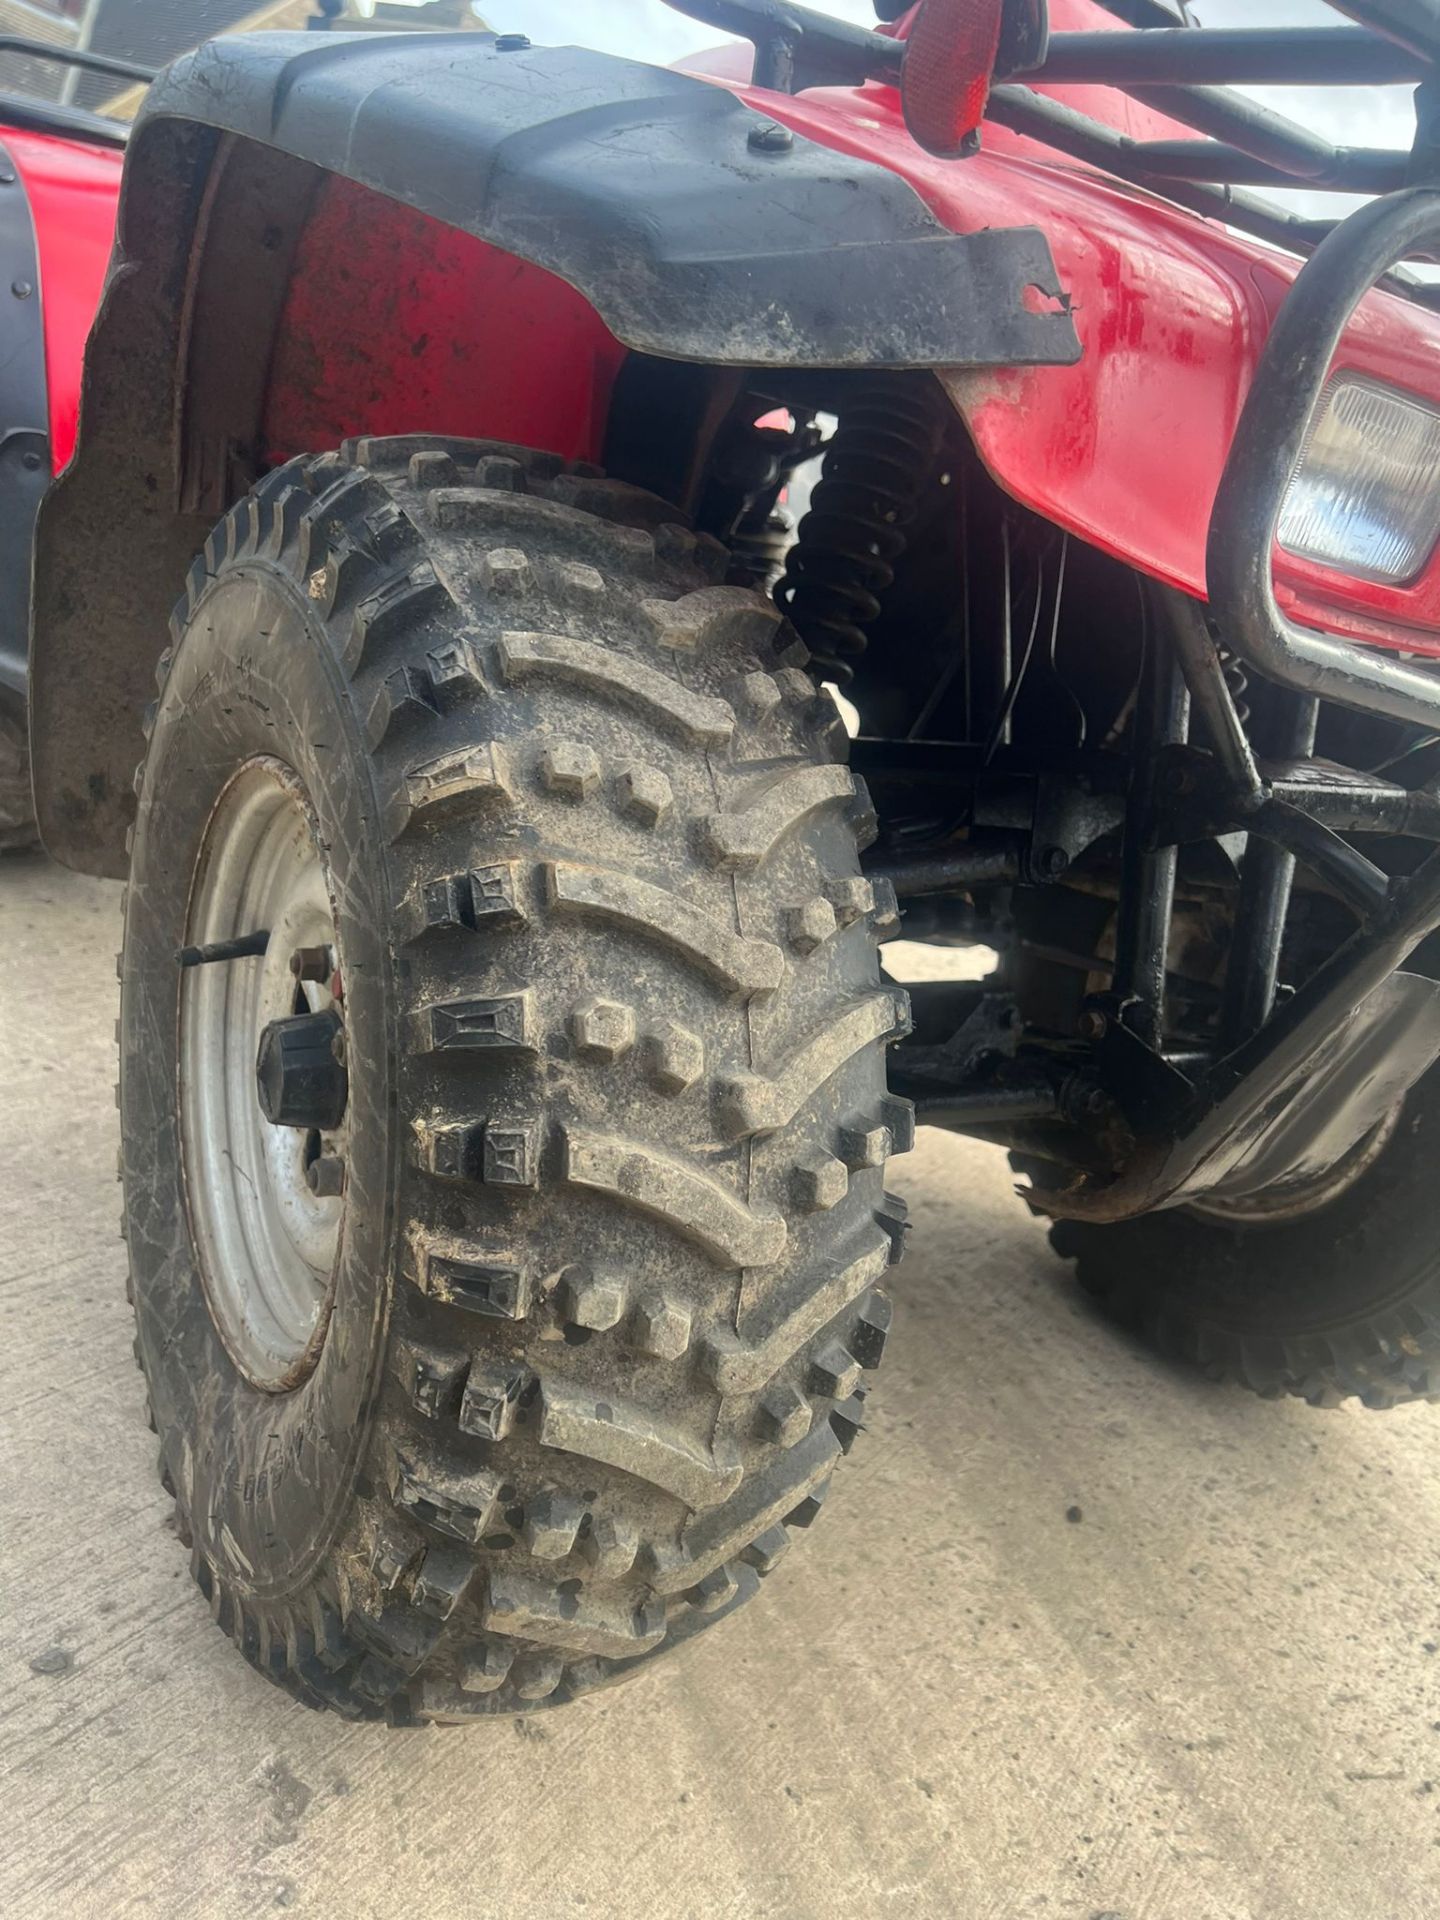 HONDA BIG RED FARM QUAD, TYRES ONLY A FEW MONTHS OLD, RUNS AND DRIVES *PLUS VAT* - Image 6 of 9